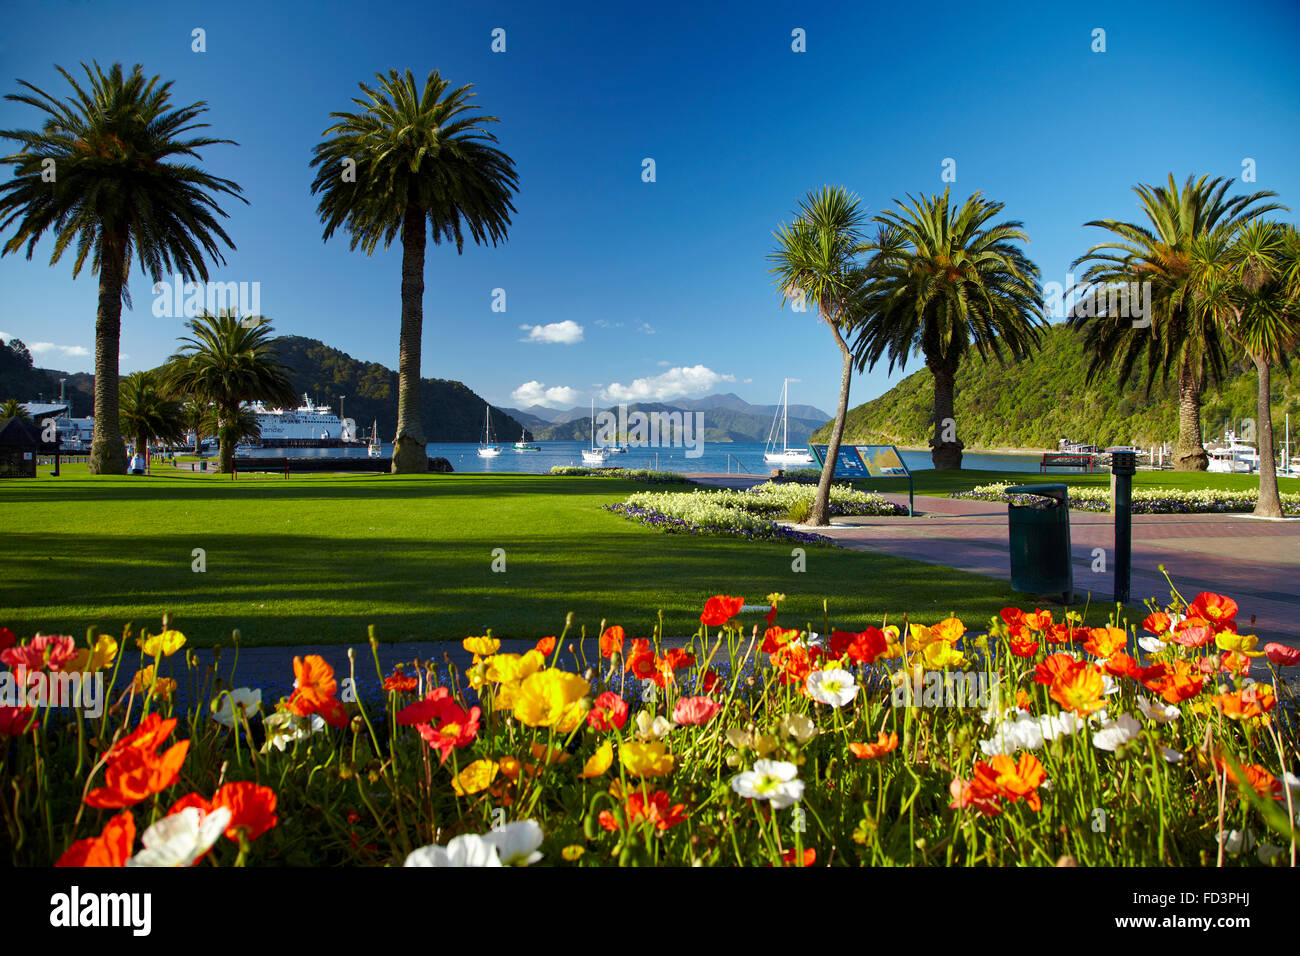 Flowers and palm trees, Foreshore Reserve, Picton, Marlborough Sounds, South Island, New Zealand Stock Photo